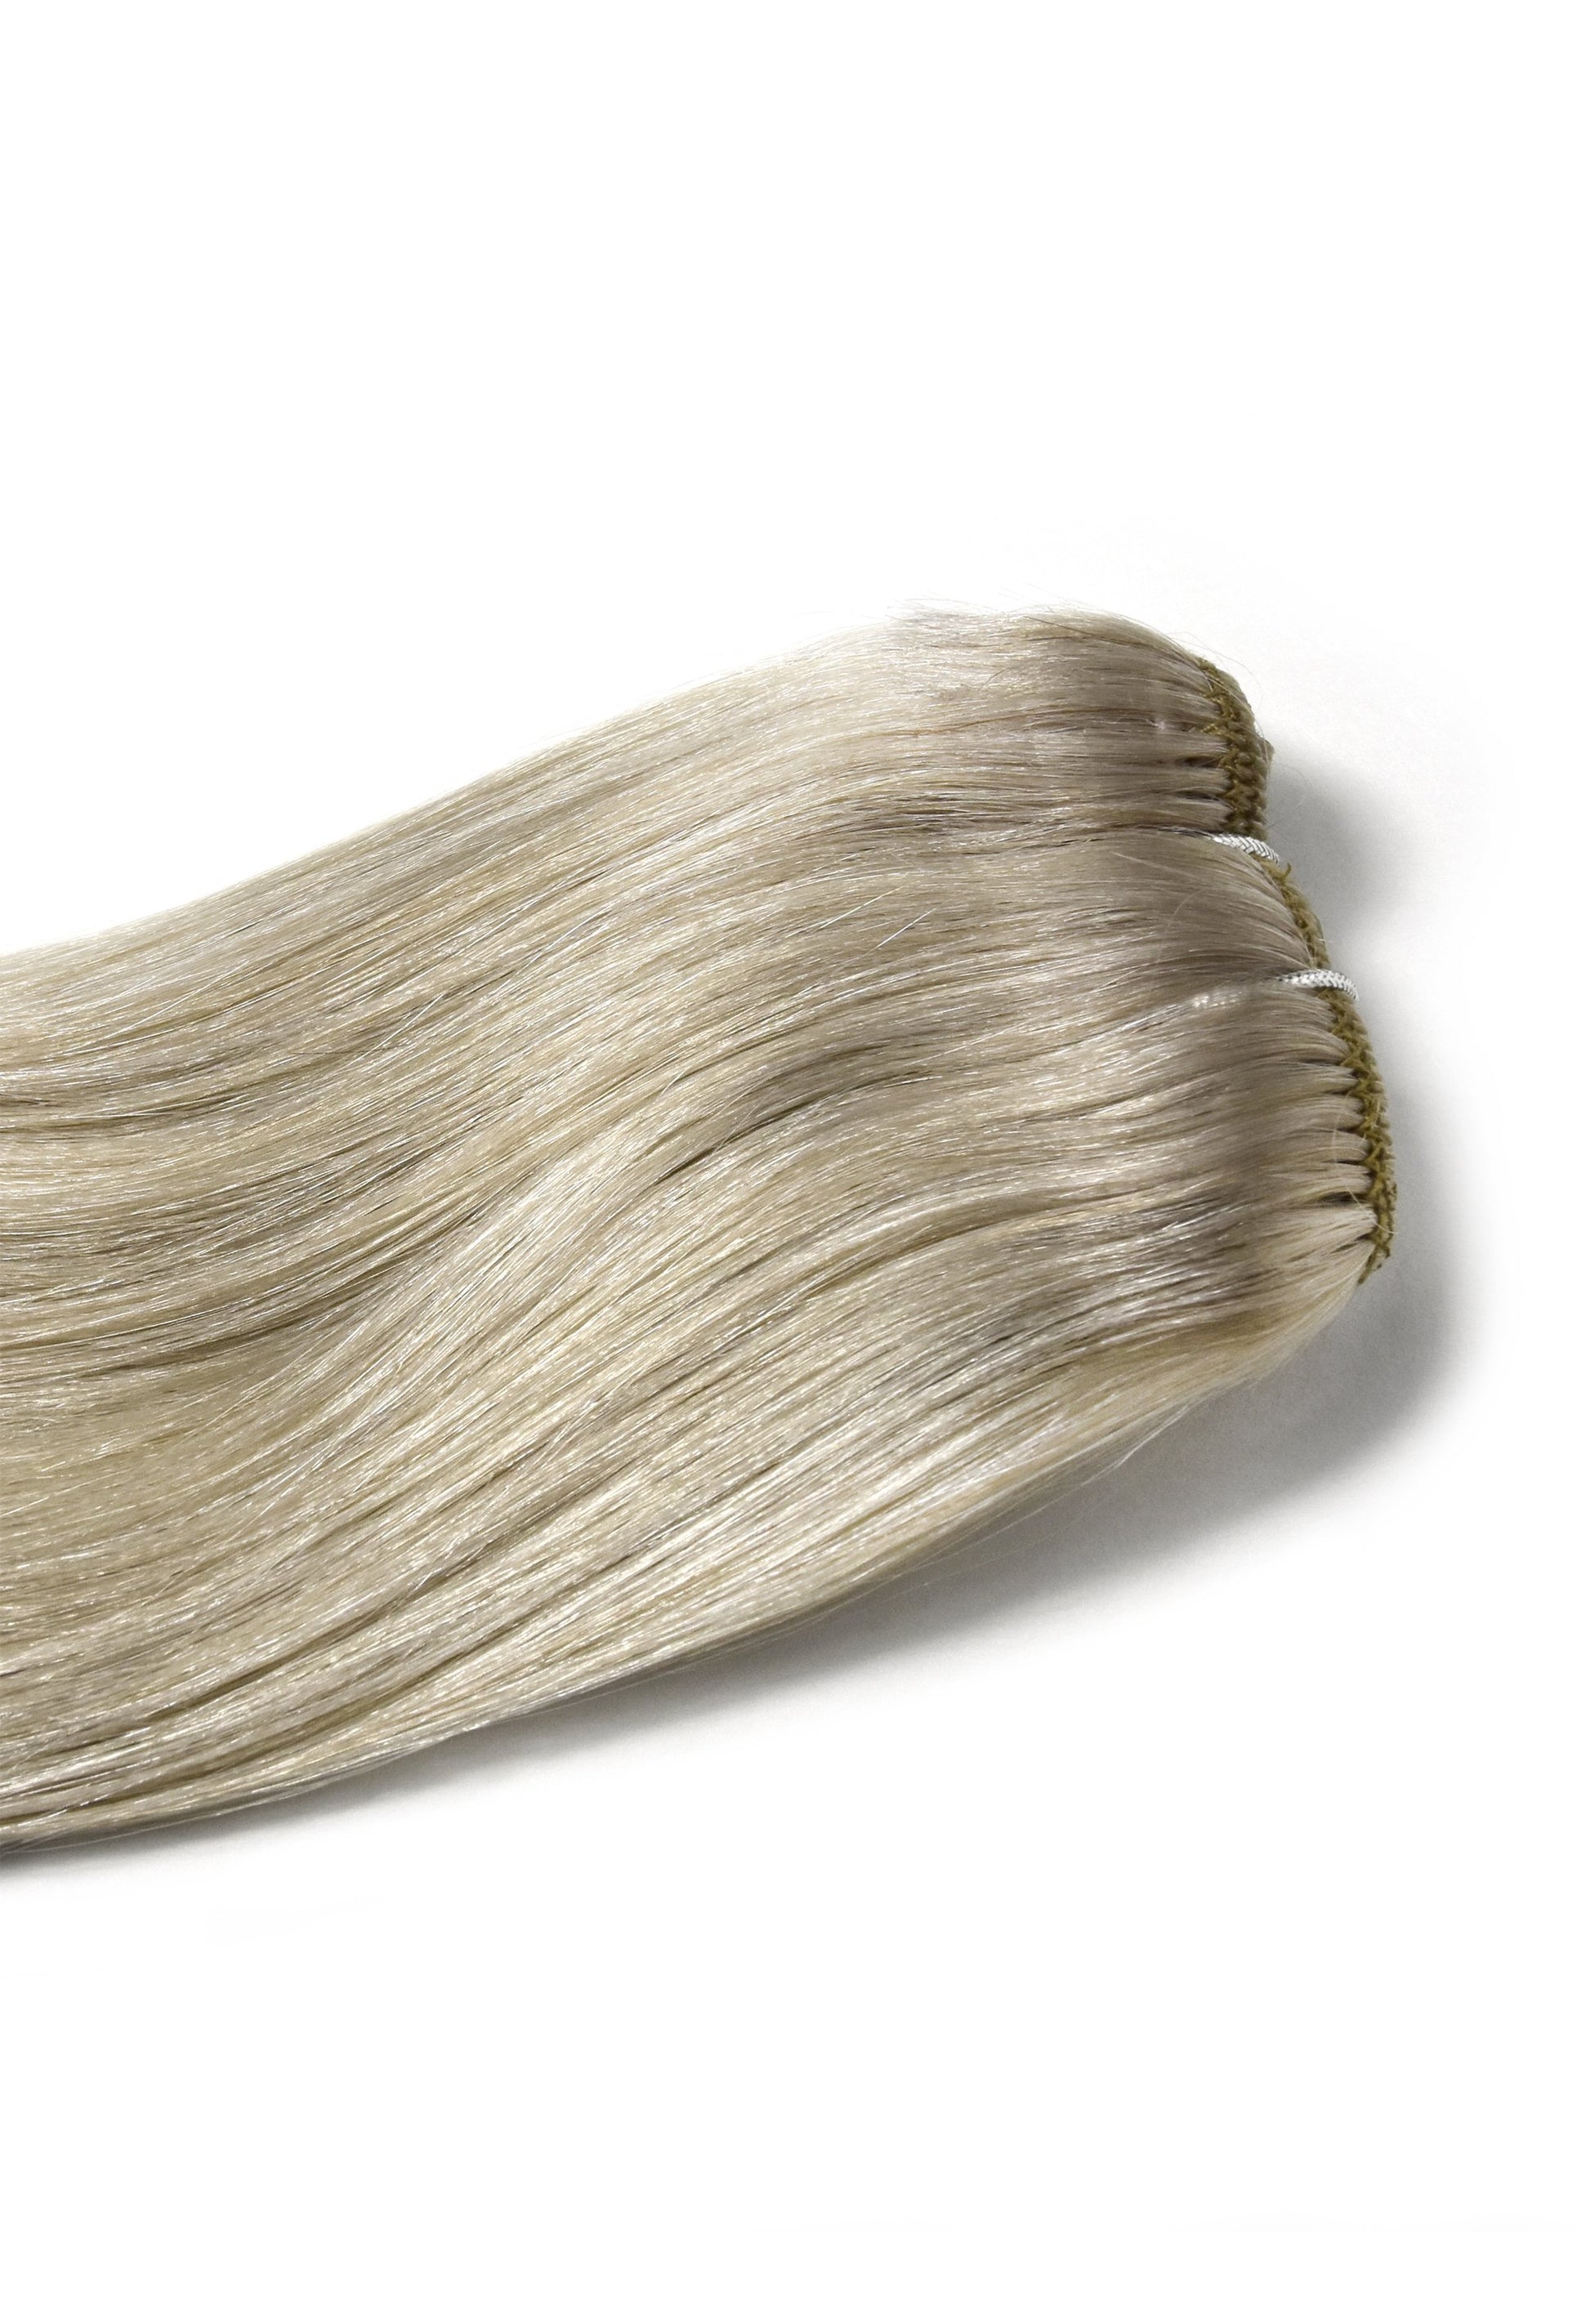 hair piece remy human hair extensions clip in silver sand 